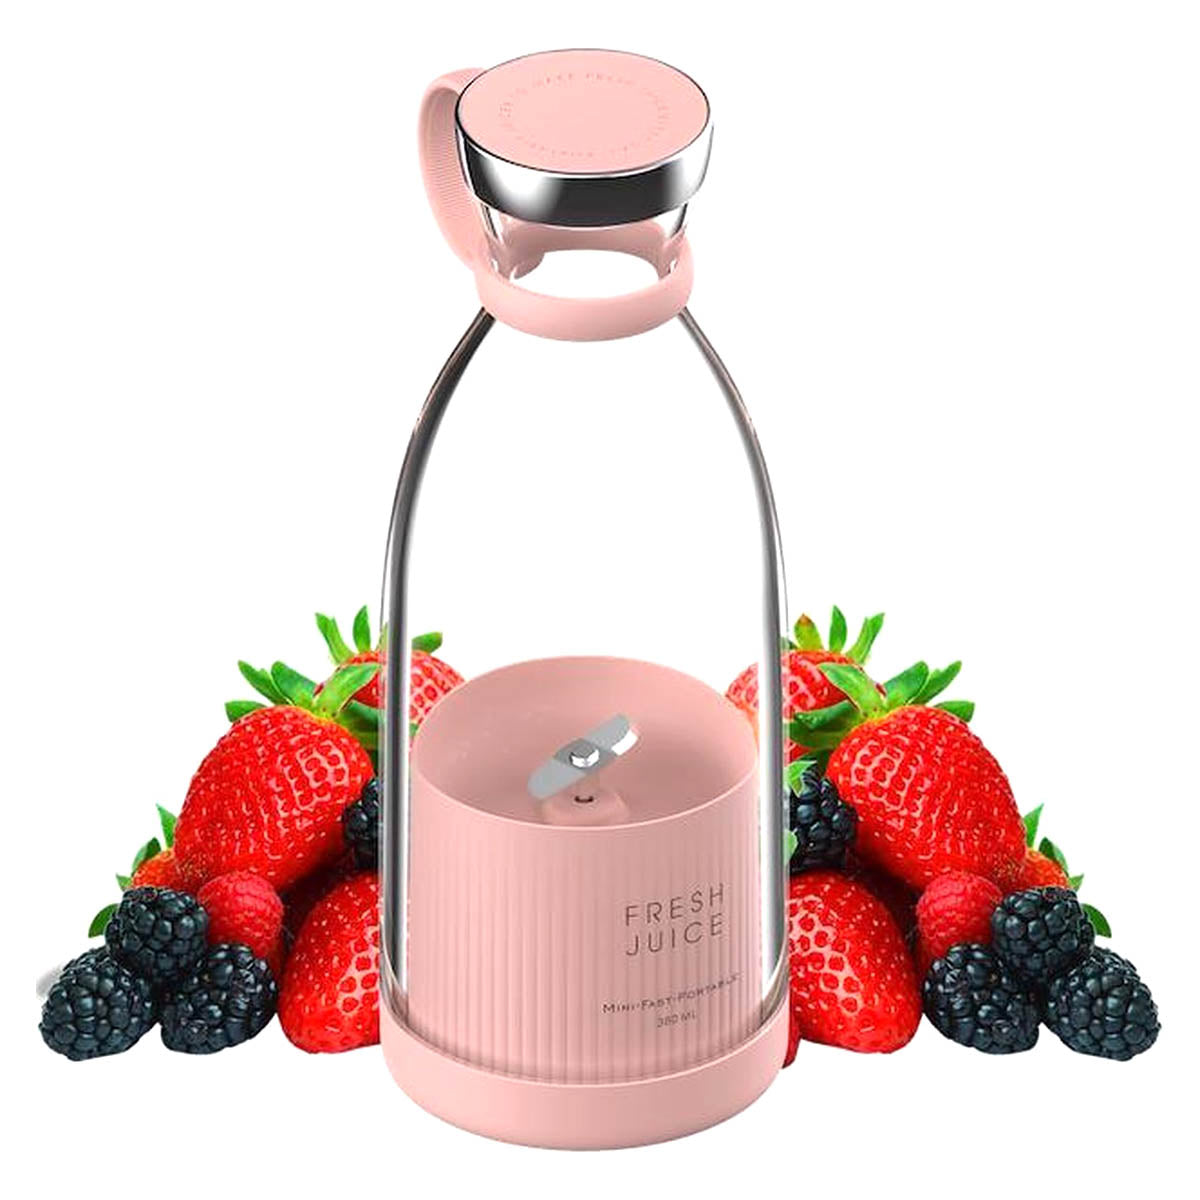 <tc>Ariko</tc> Portable Blender - Mini blender for on the go - smoothie mixer - Baby food - Fresh Juices - 350ml - Magnetic USB charger - Pink